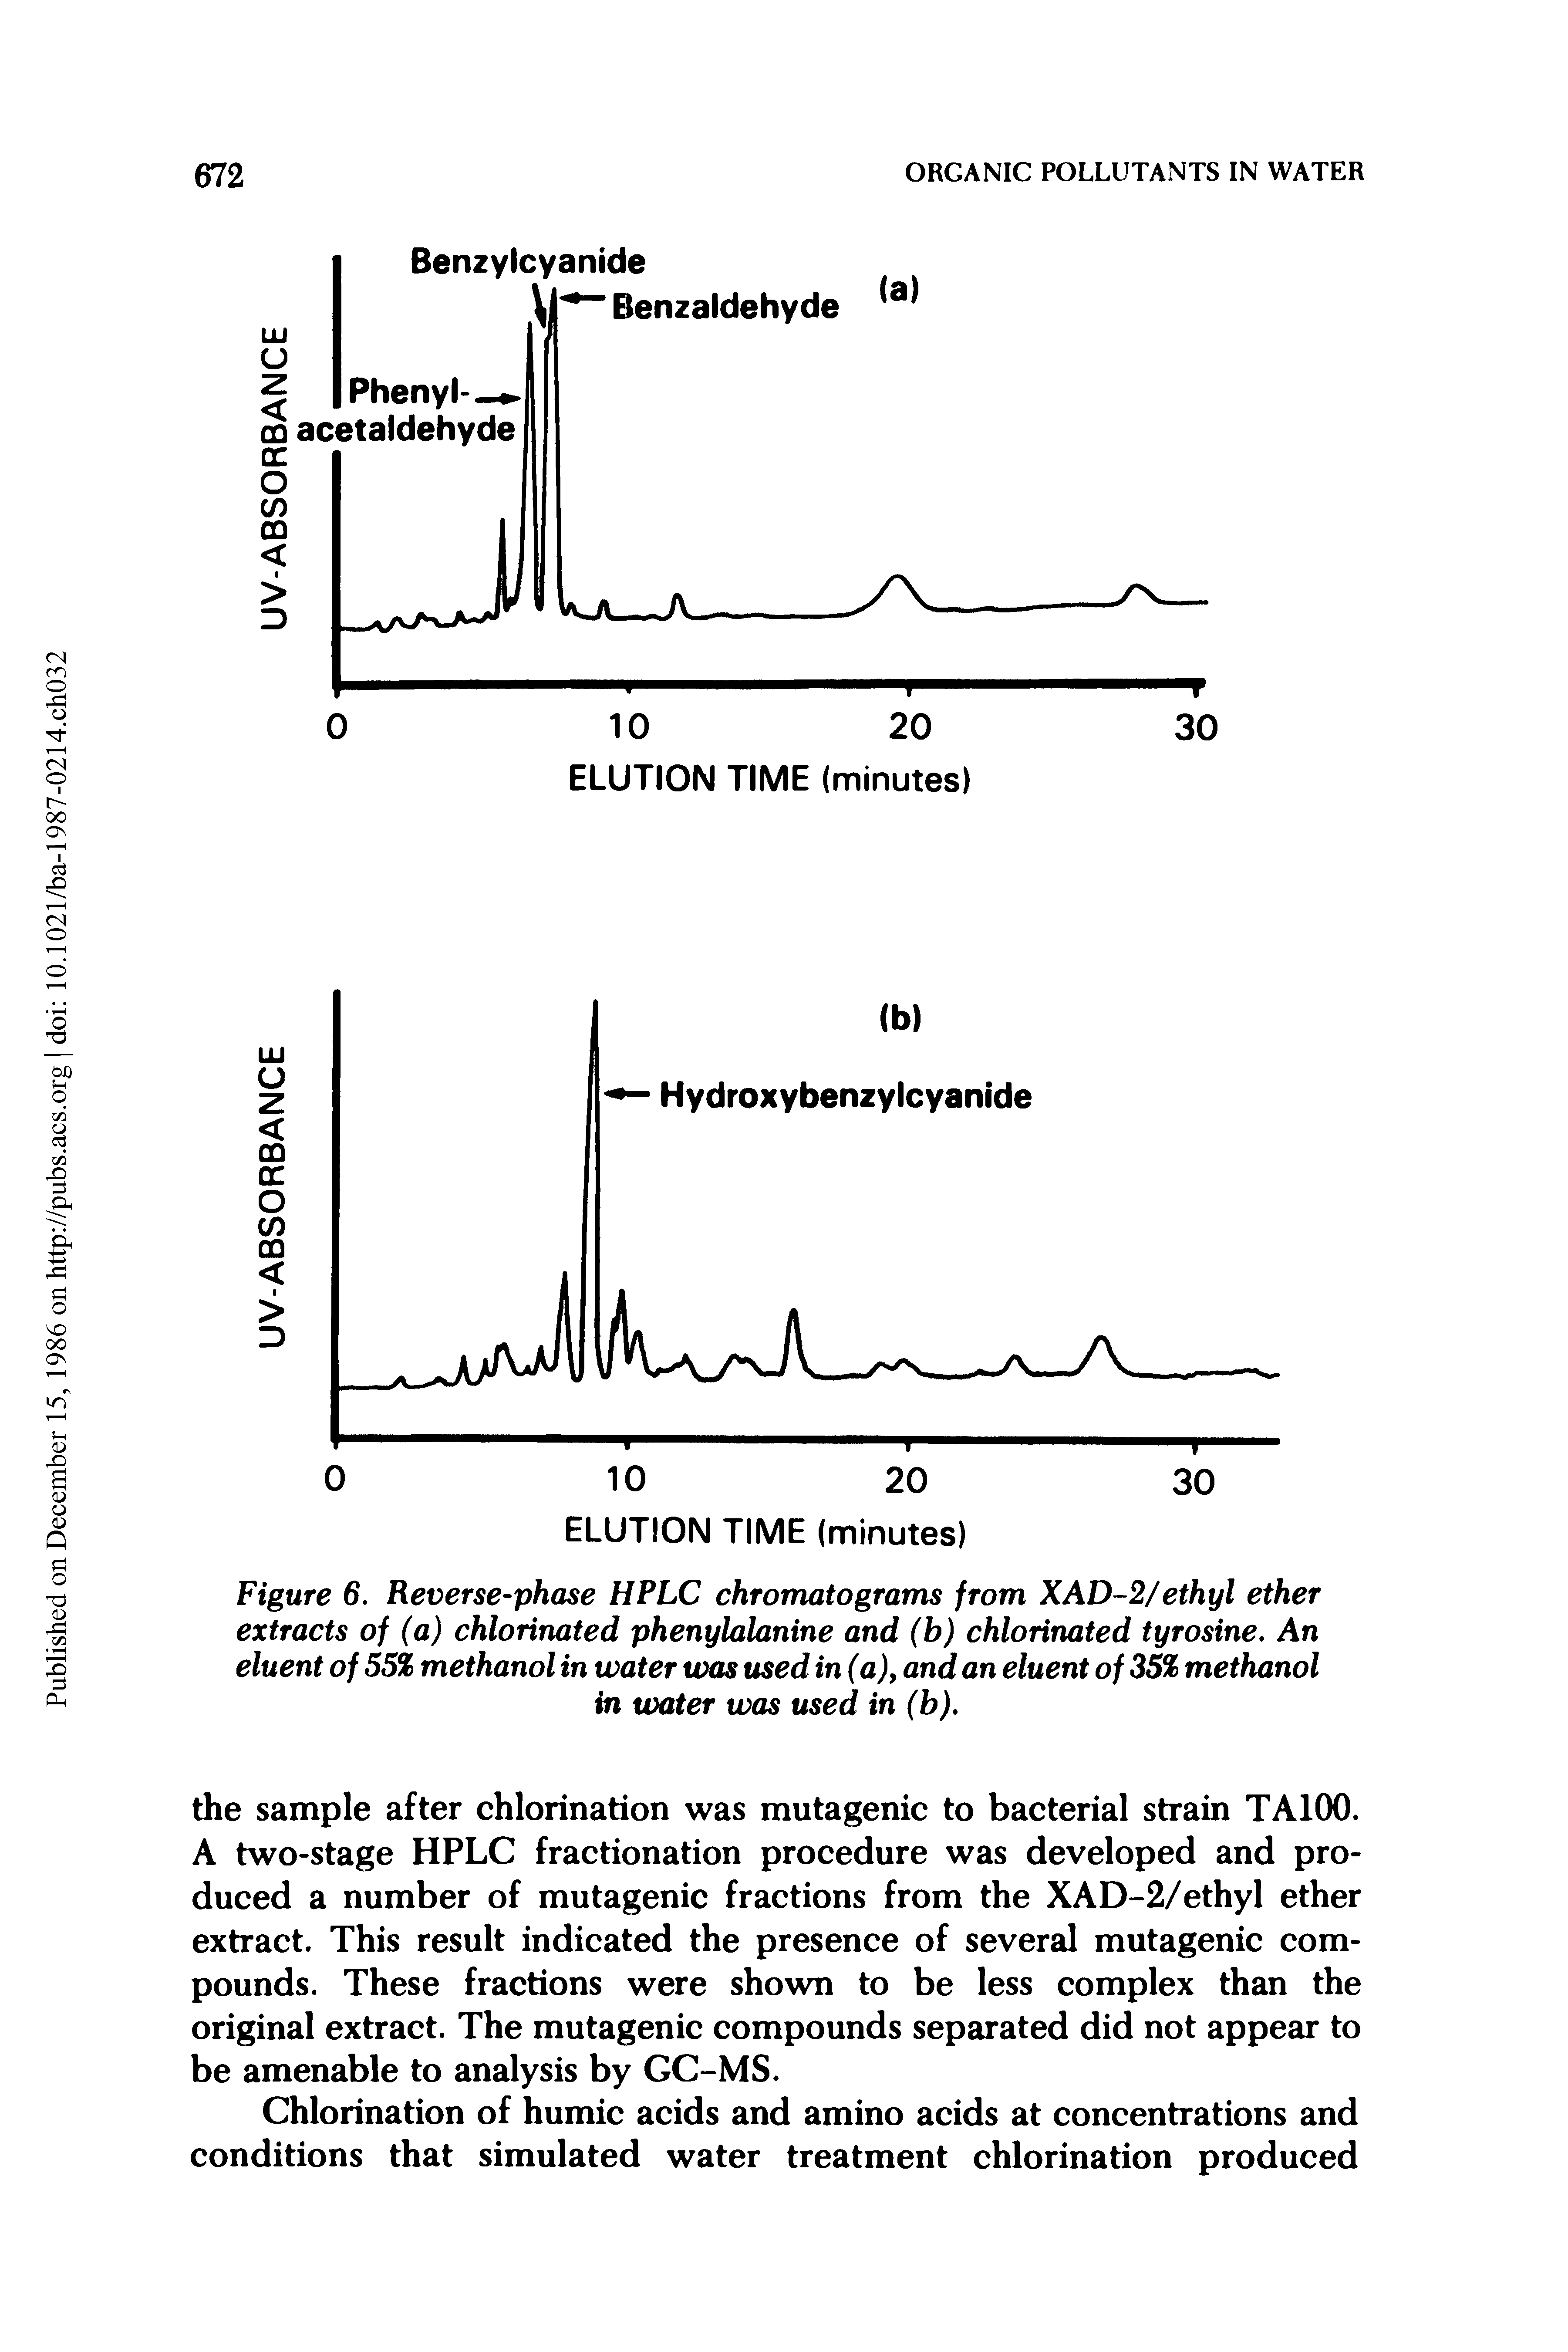 Figure 6. Reverse-phase HPLC chromatograms from XAD-2/ethyl ether extracts of (a) chlorinated phenylalanine and (b) chlorinated tyrosine. An eluent of 55% methanol in water was used in (a), and an eluent of 35% methanol in water was used in (b).